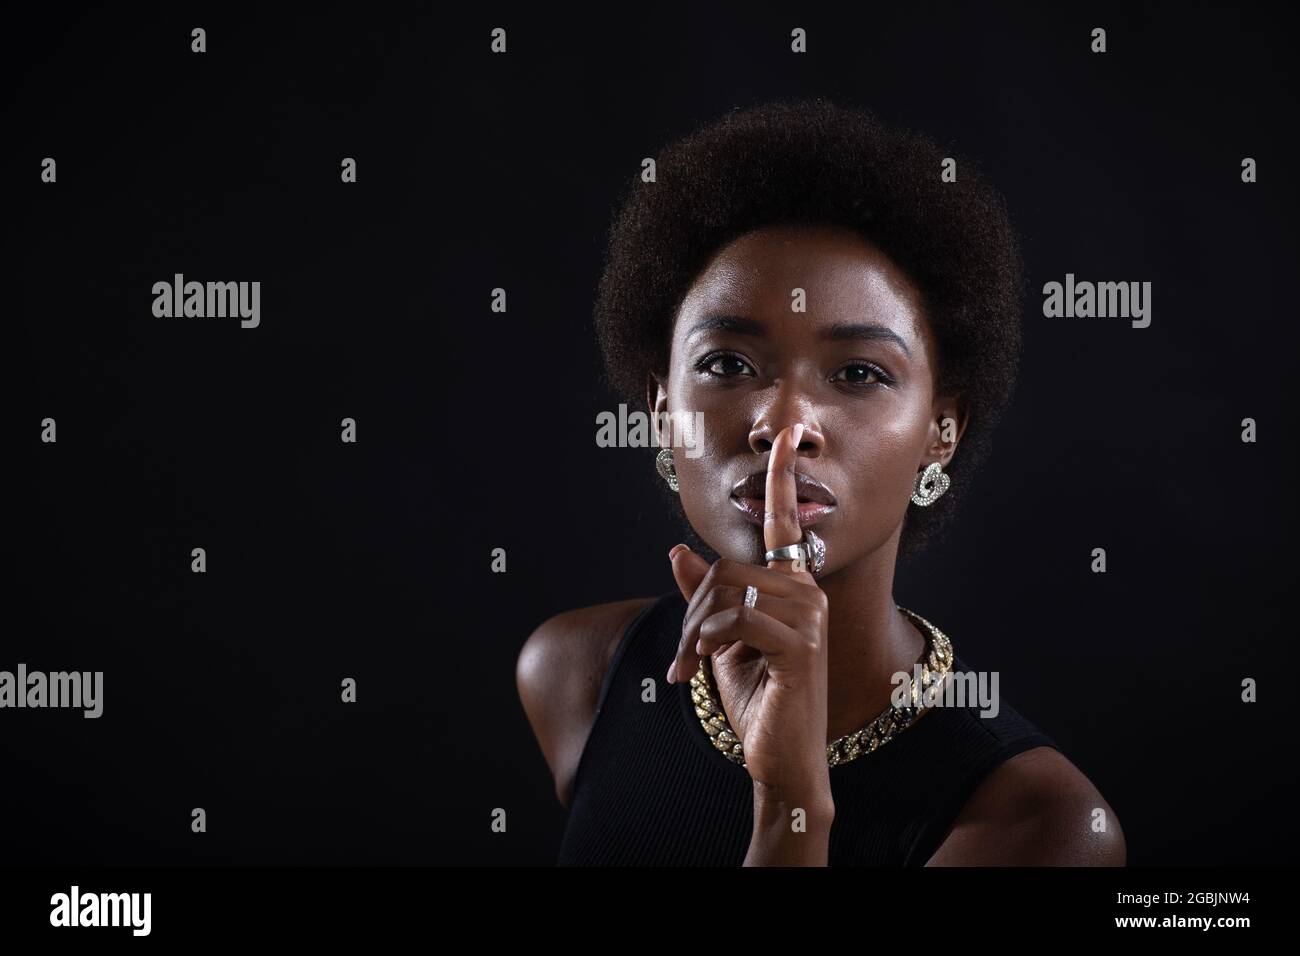 Closeup of beautiful young african american dark-skinned woman with finger on her lips showing sh silence gesture on black background. Stock Photo